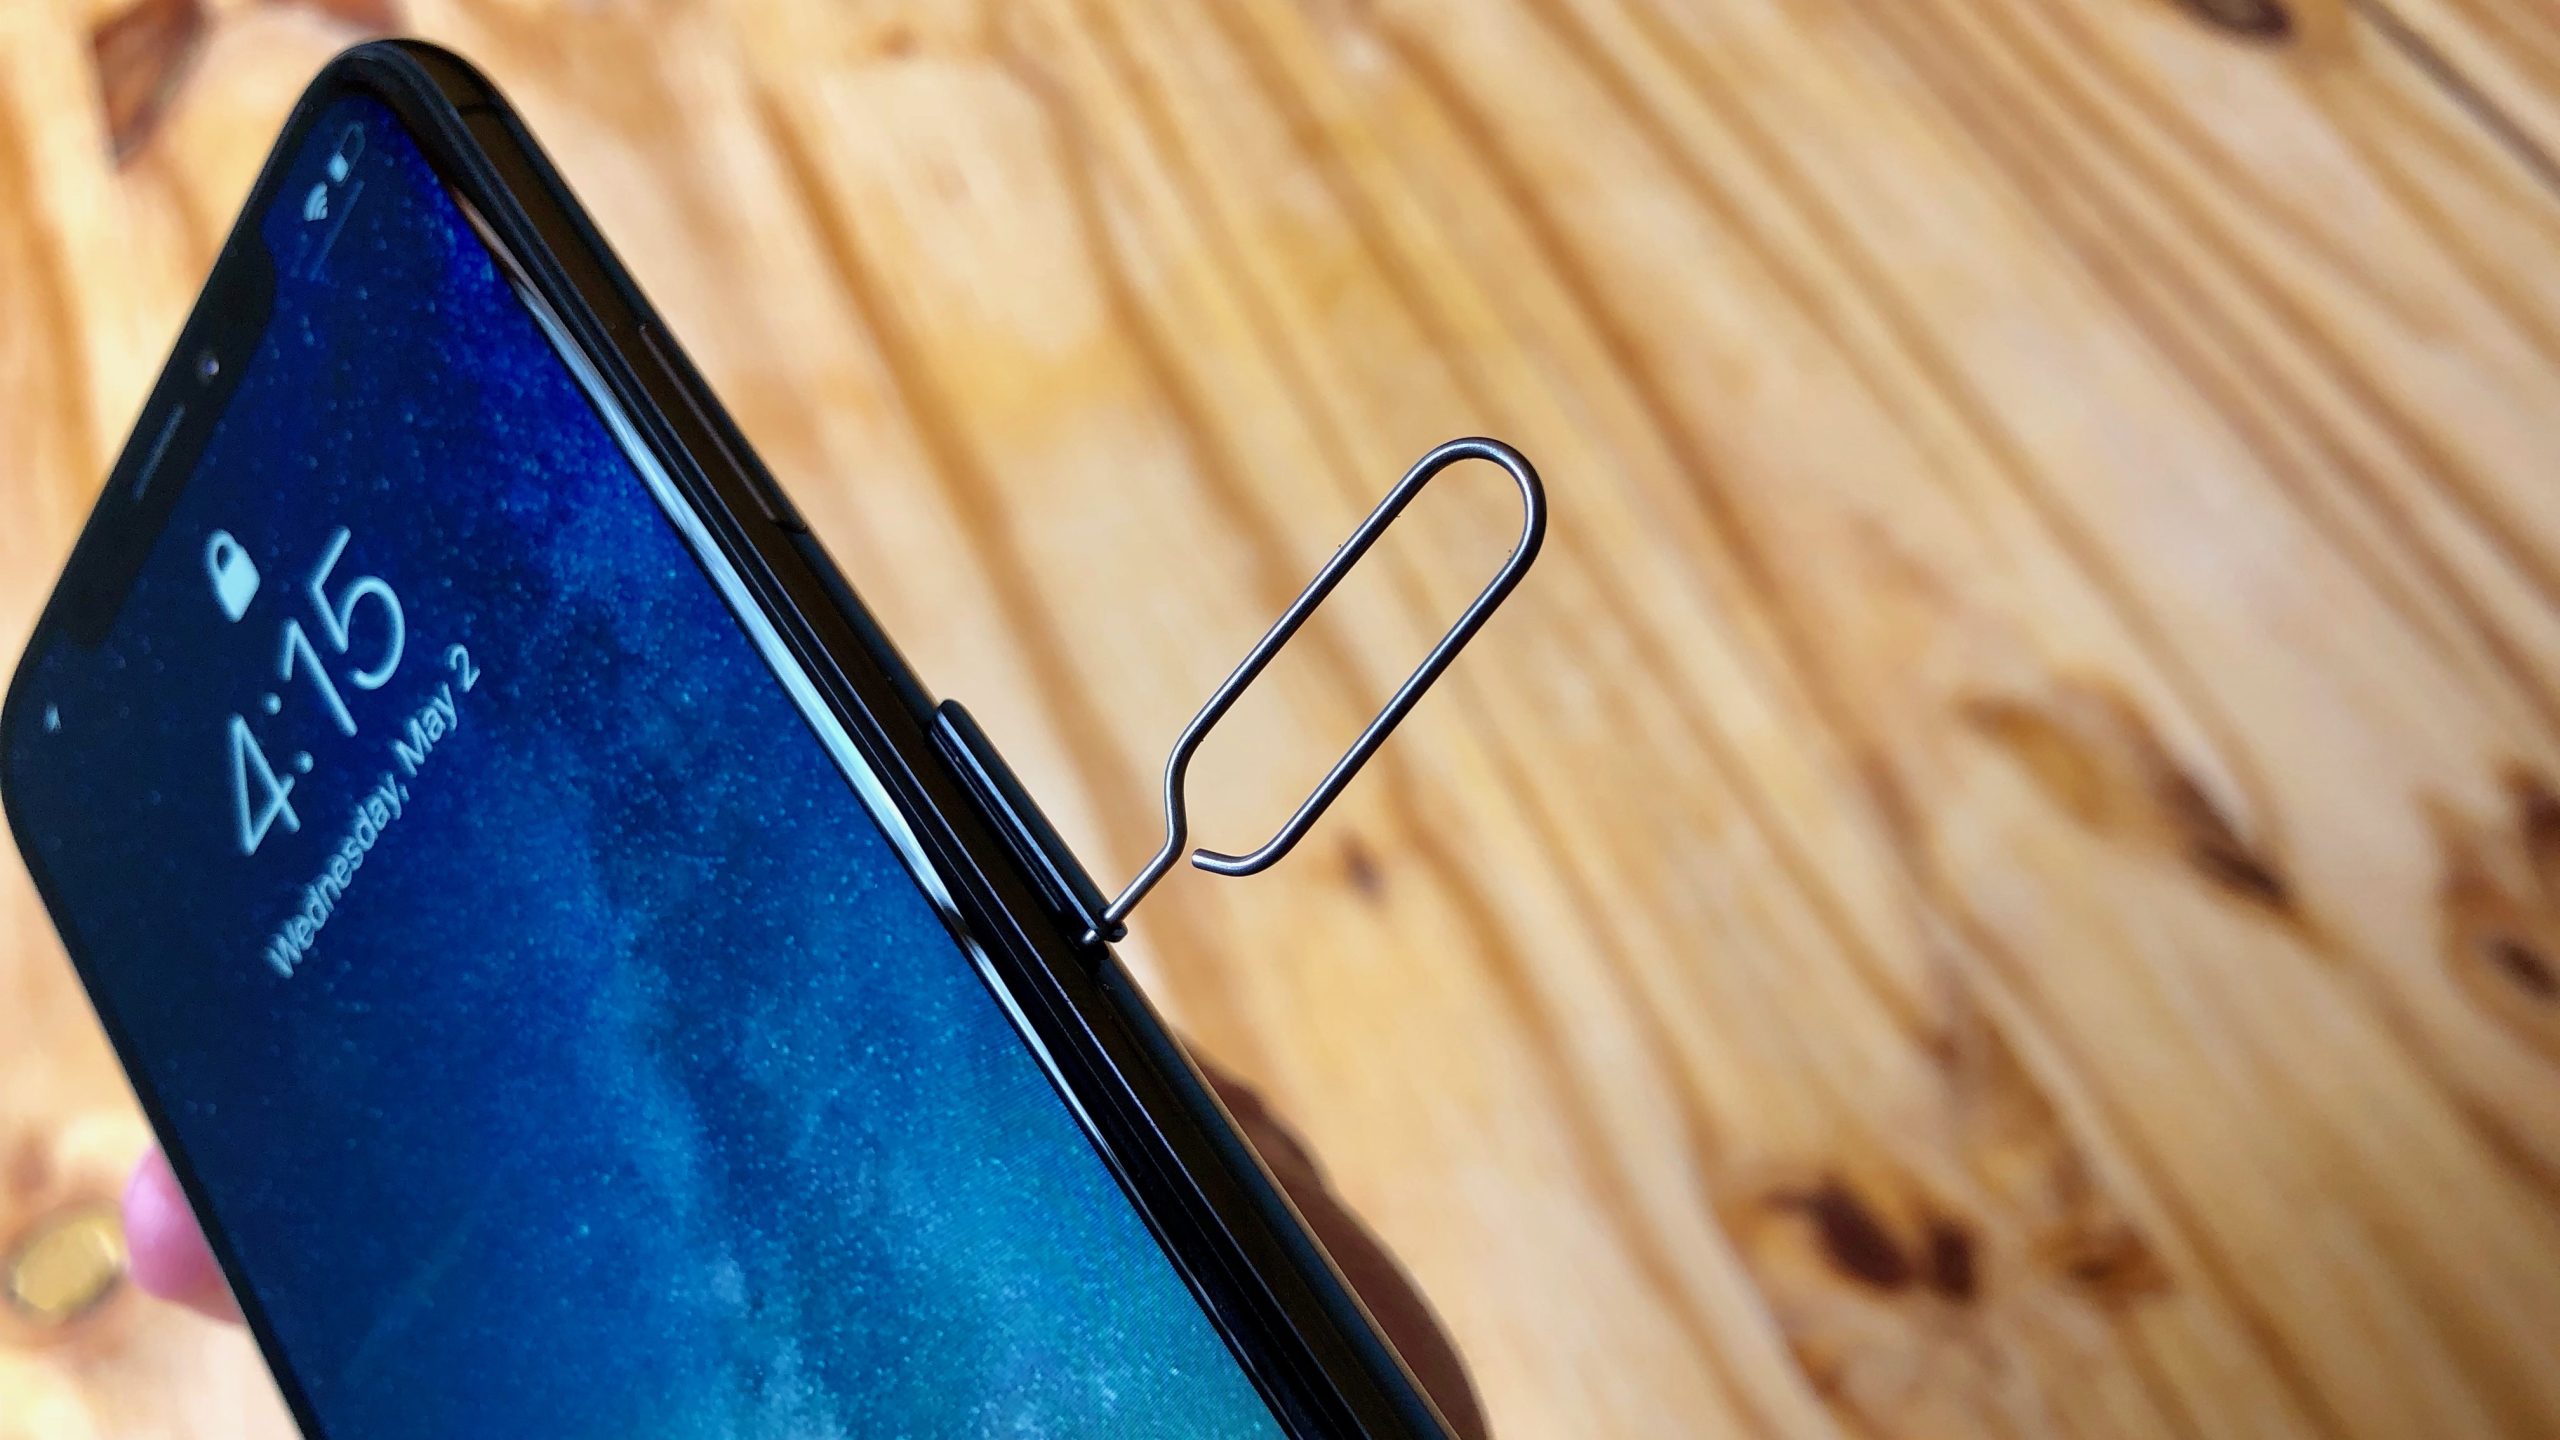 A person holding an iPhone with a paperclip inserted in the SIM card slot, with a wooden background.